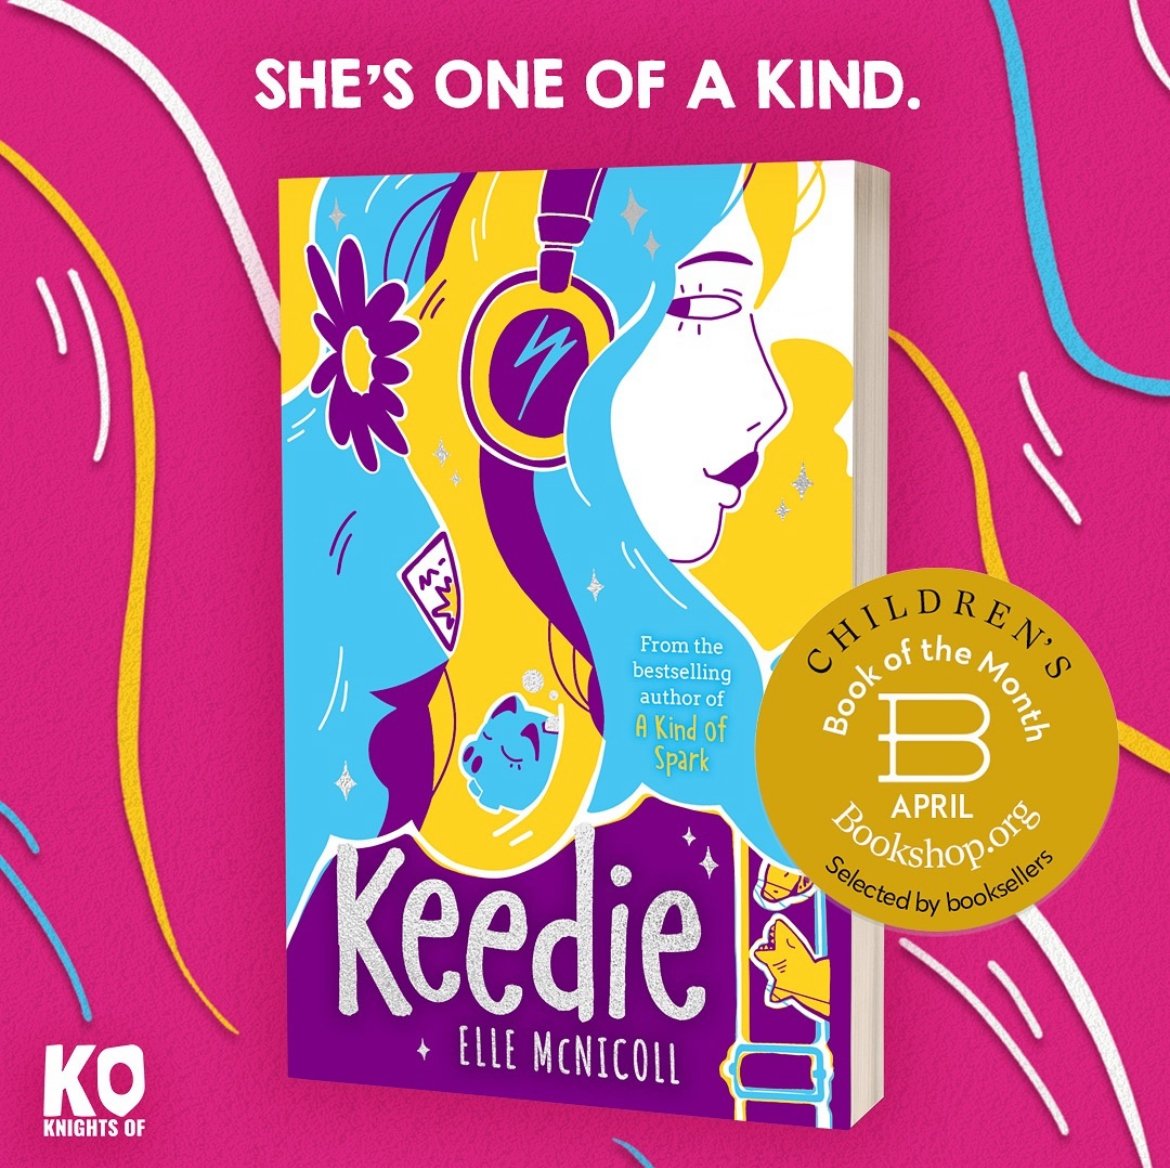 The sleepy town of Juniper is about to wake up and see that #Keedie is one of a kind✨ Happy publication day, @BooksandChokers! The prequel to the award-winning and bestselling #AKindofSpark is out now with @_KnightsOf! uk.bookshop.org/p/books/keedie…